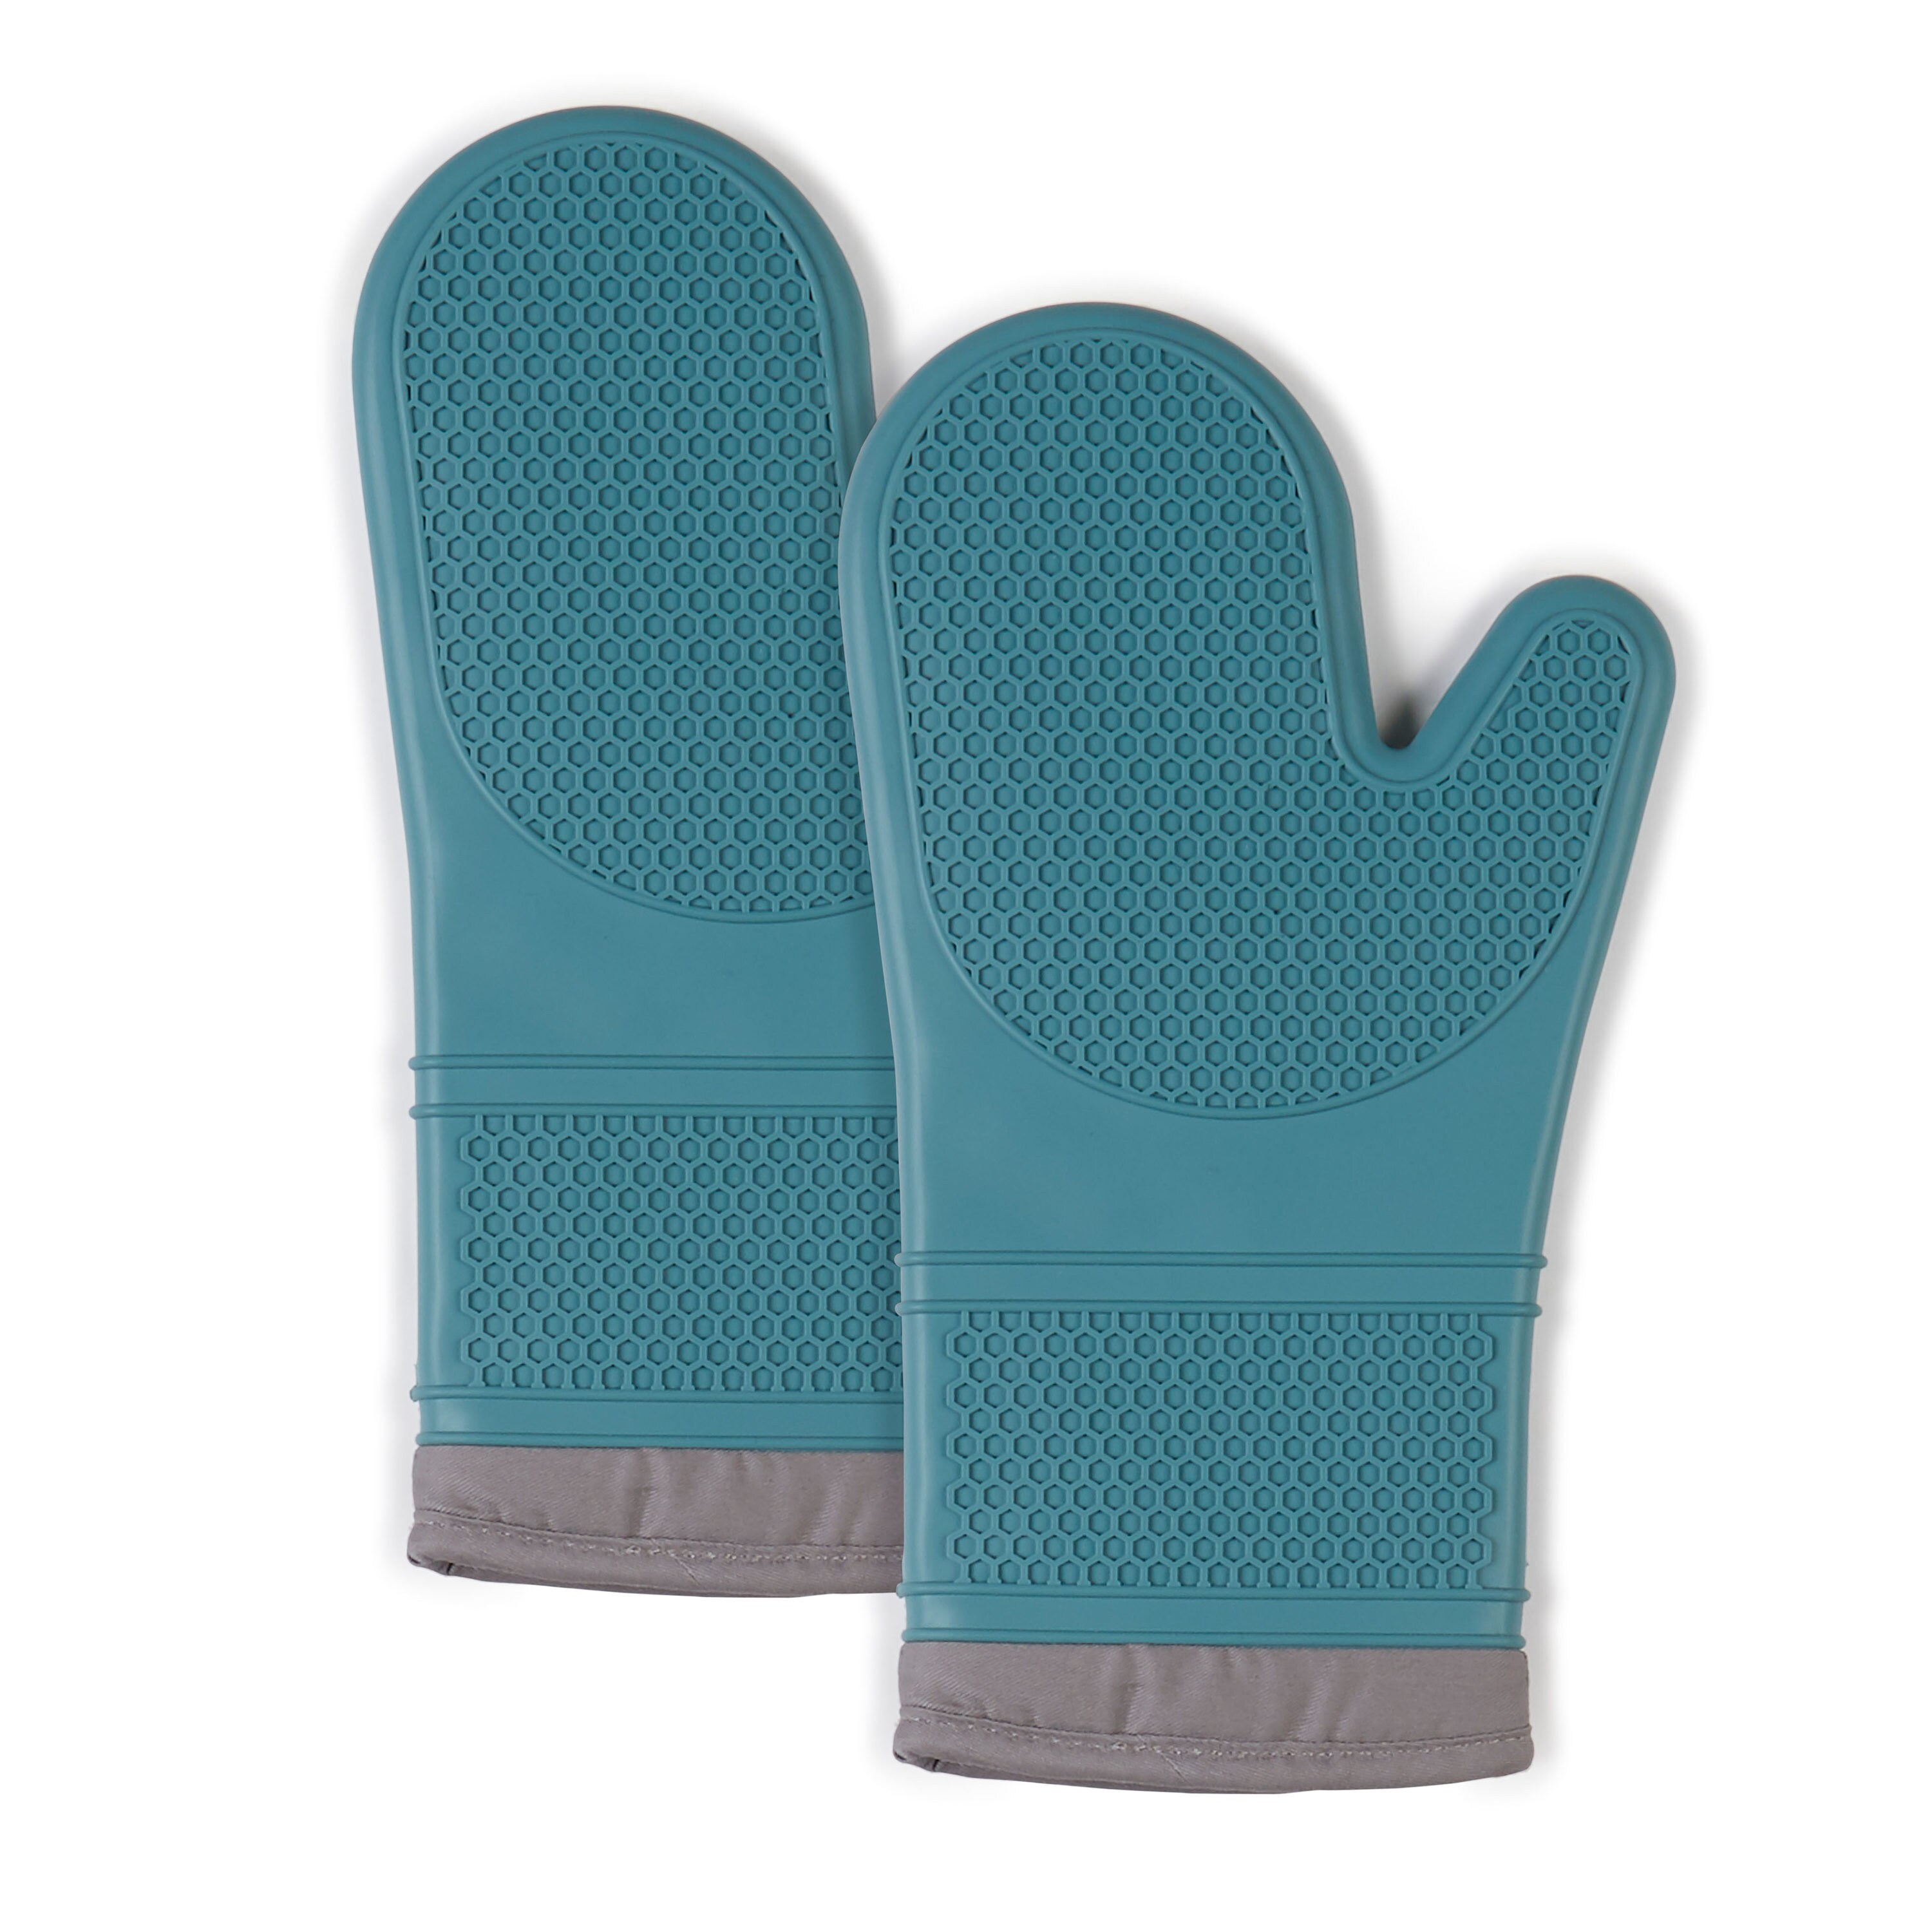 Oven Mitts Heat Resistant - 1 Pair Silicone Oven Mitts, Non-Slip Grip Soft Oven  Mitt, Flexible Kitchen Oven Mits Potholders Oven Gloves for Cooking Baking  Kitchen Mittens,Blue 